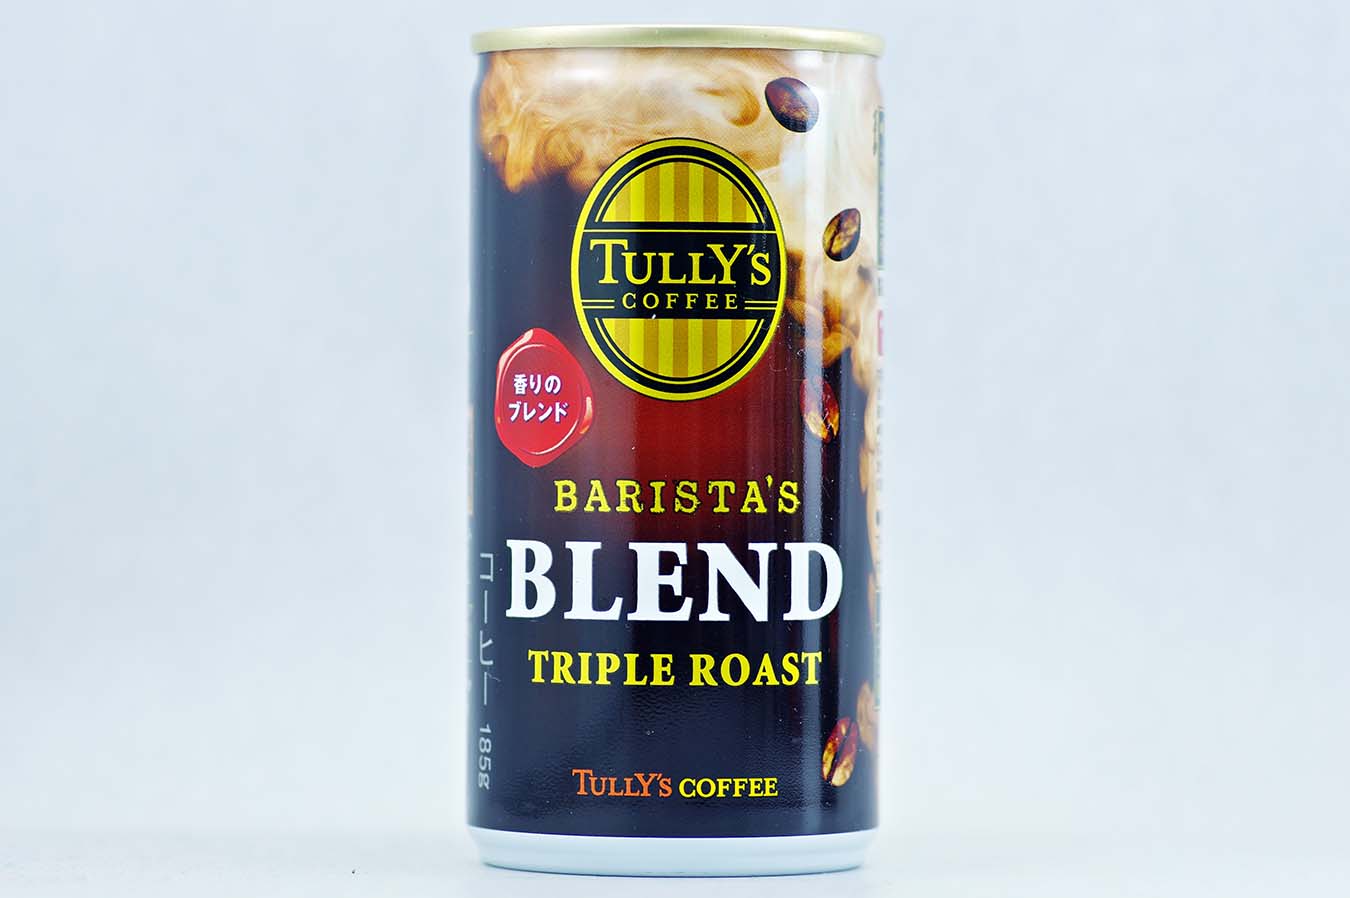 TULLY'S COFFEE BARISTA'S BLEND 2015年10月